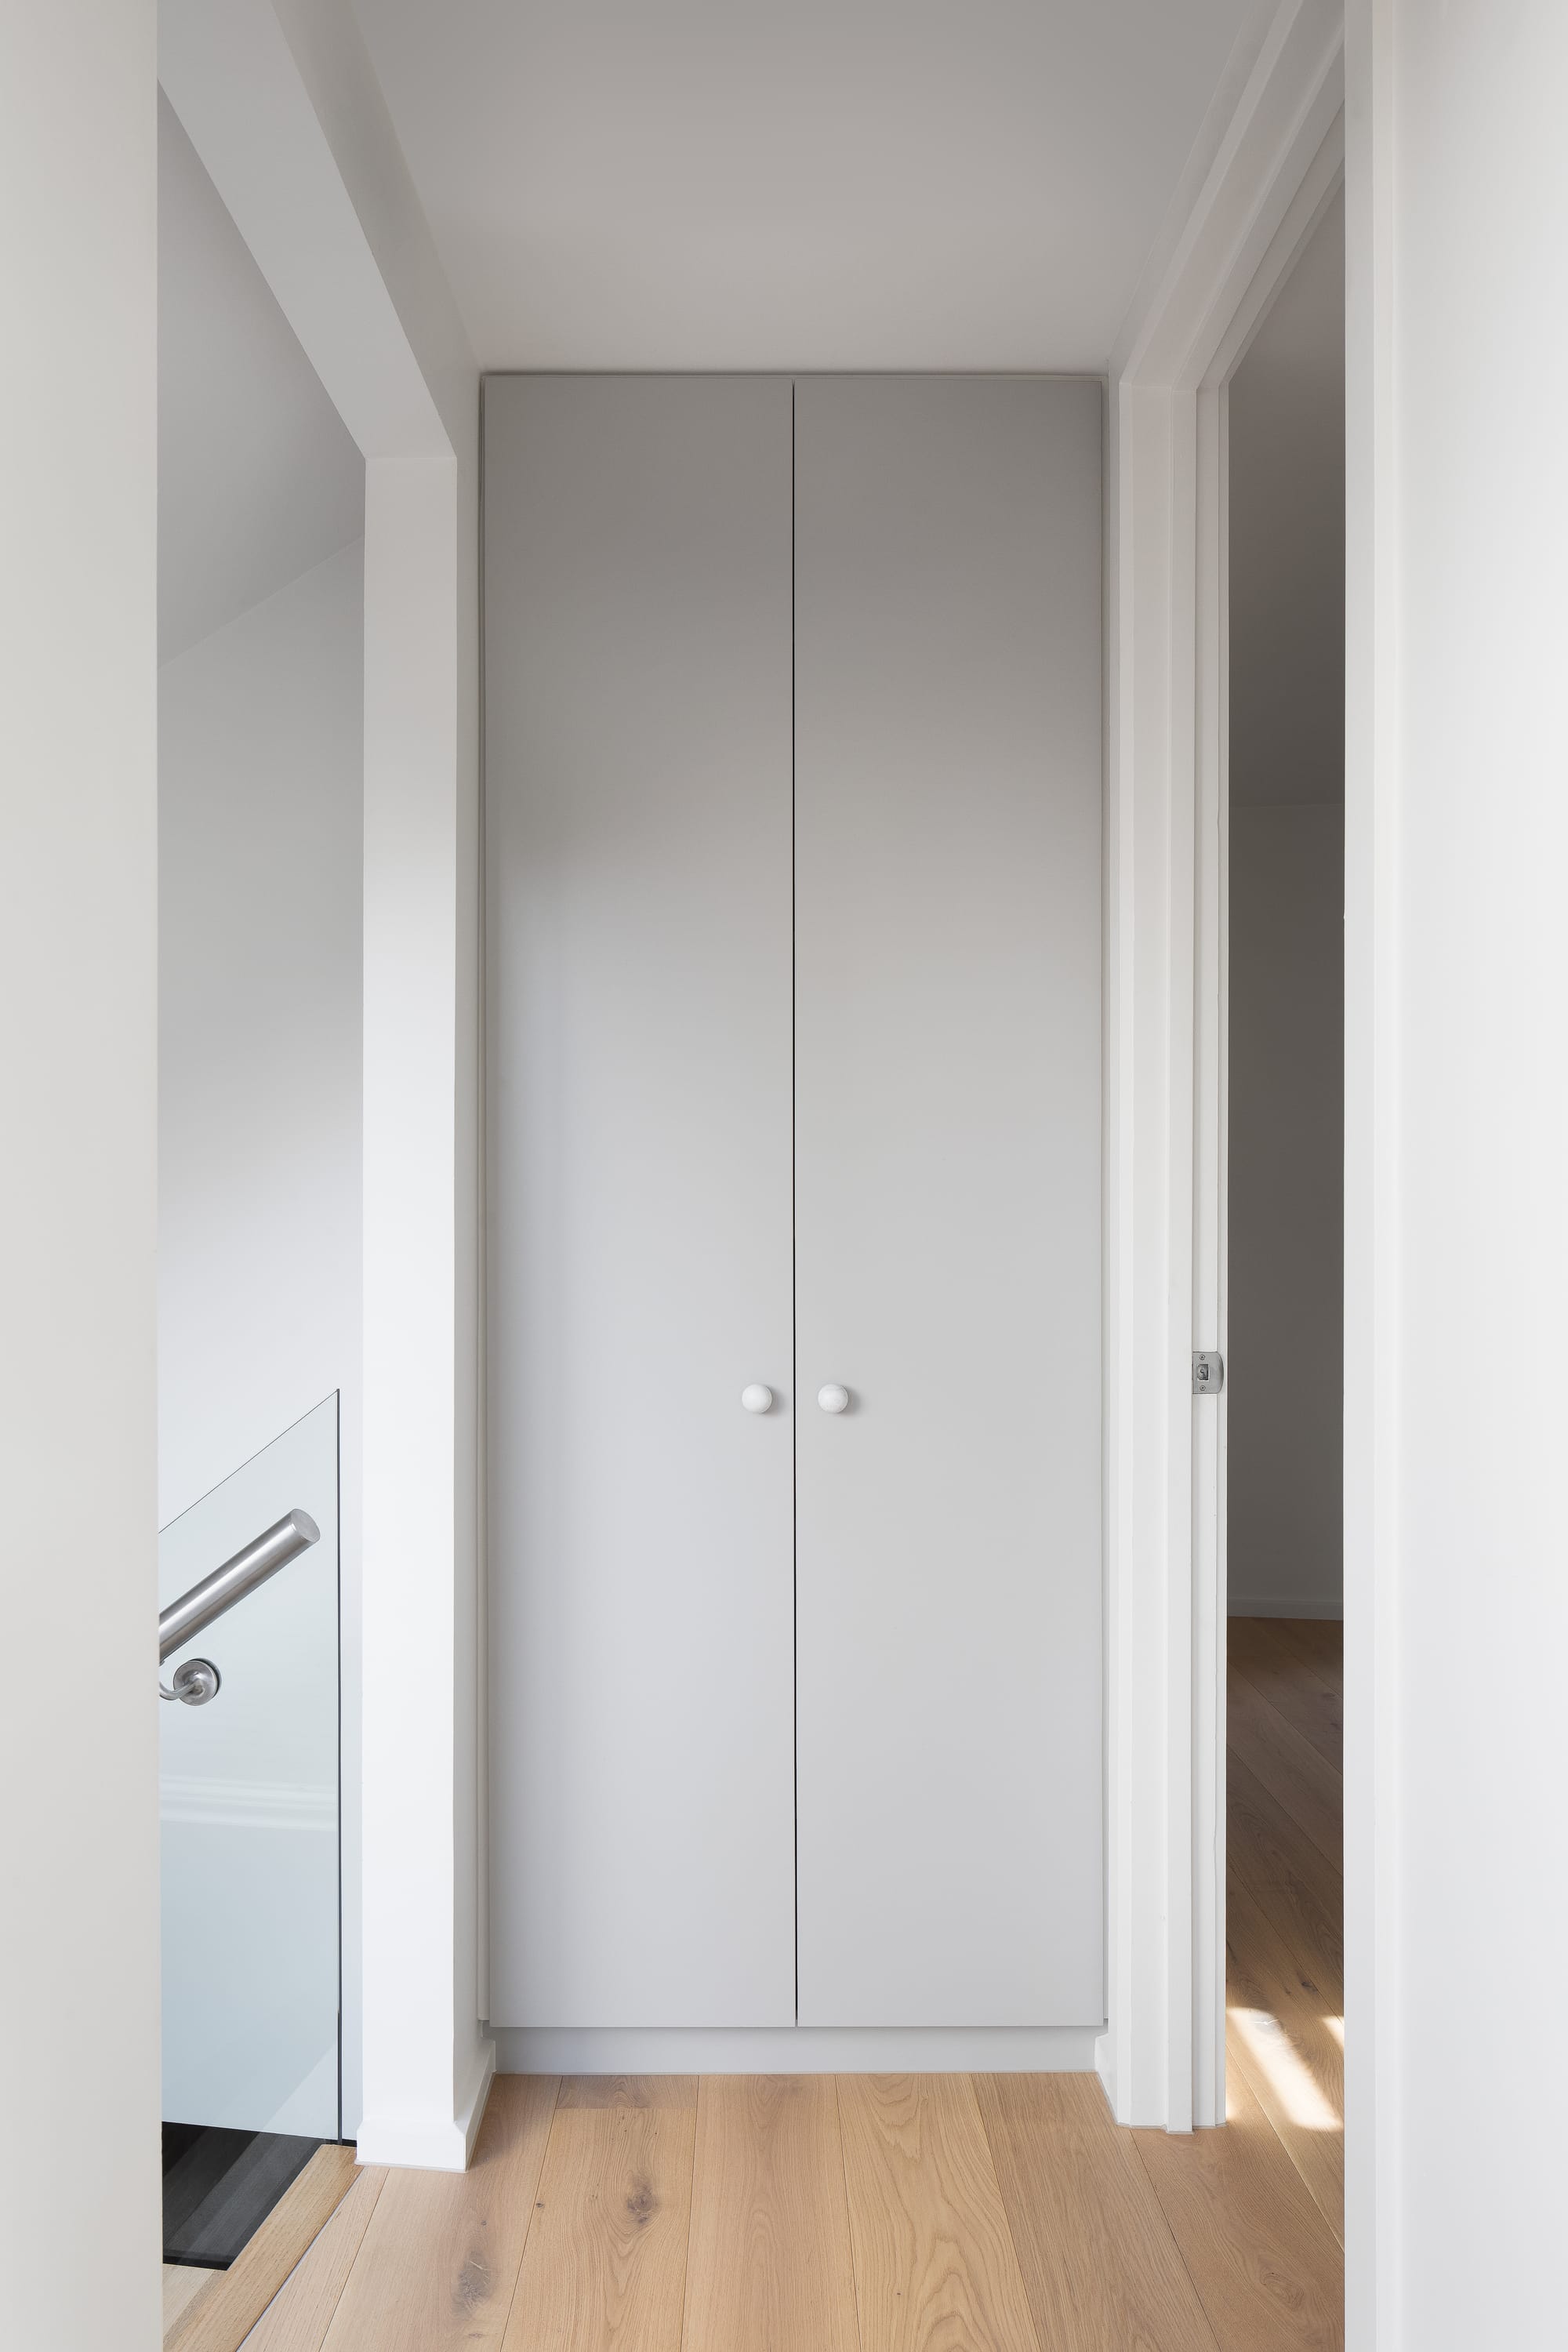 Stead House by Hannaford Design Studio. Photography by Emily Bartlett. Grey integrated cupboard with double doors. Timber floors. White walls. 